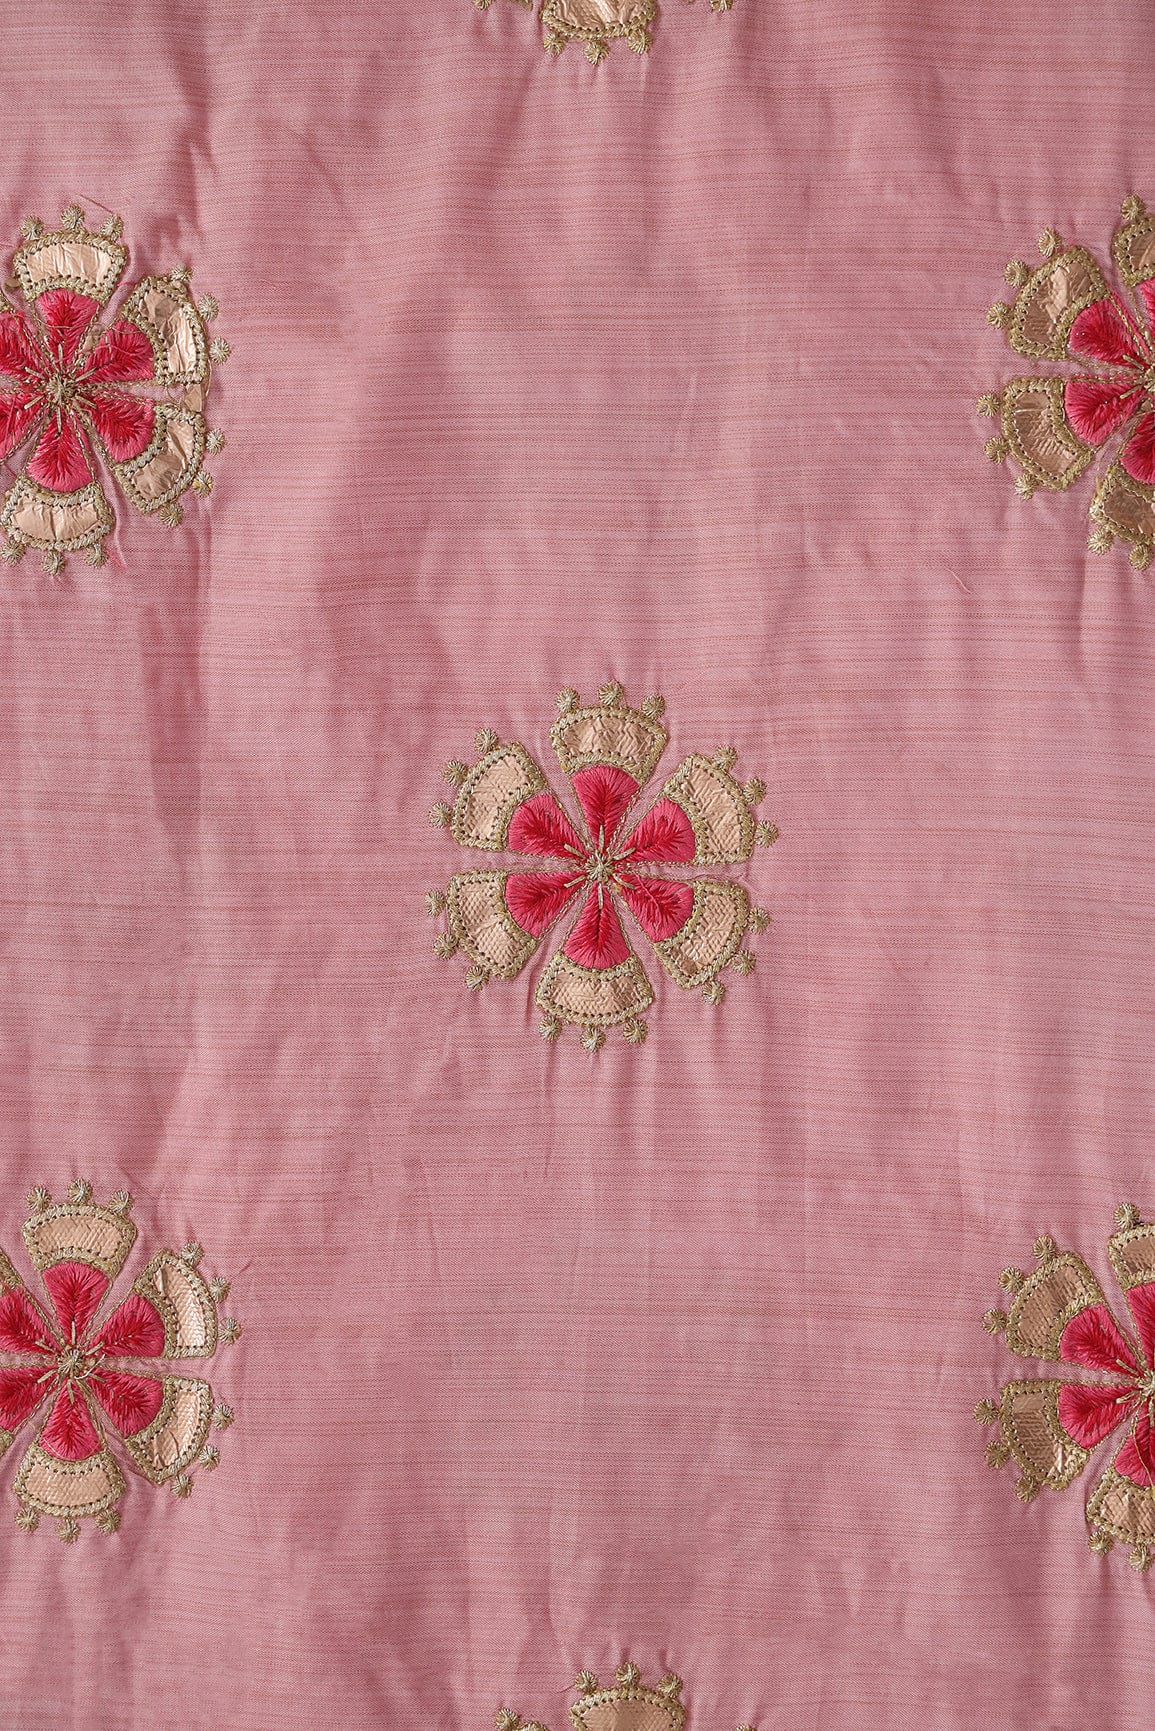 doeraa Embroidery Fabrics Gold Sequins with Zari and Red Motif Embroidery On Pink Bamboo Silk Fabric